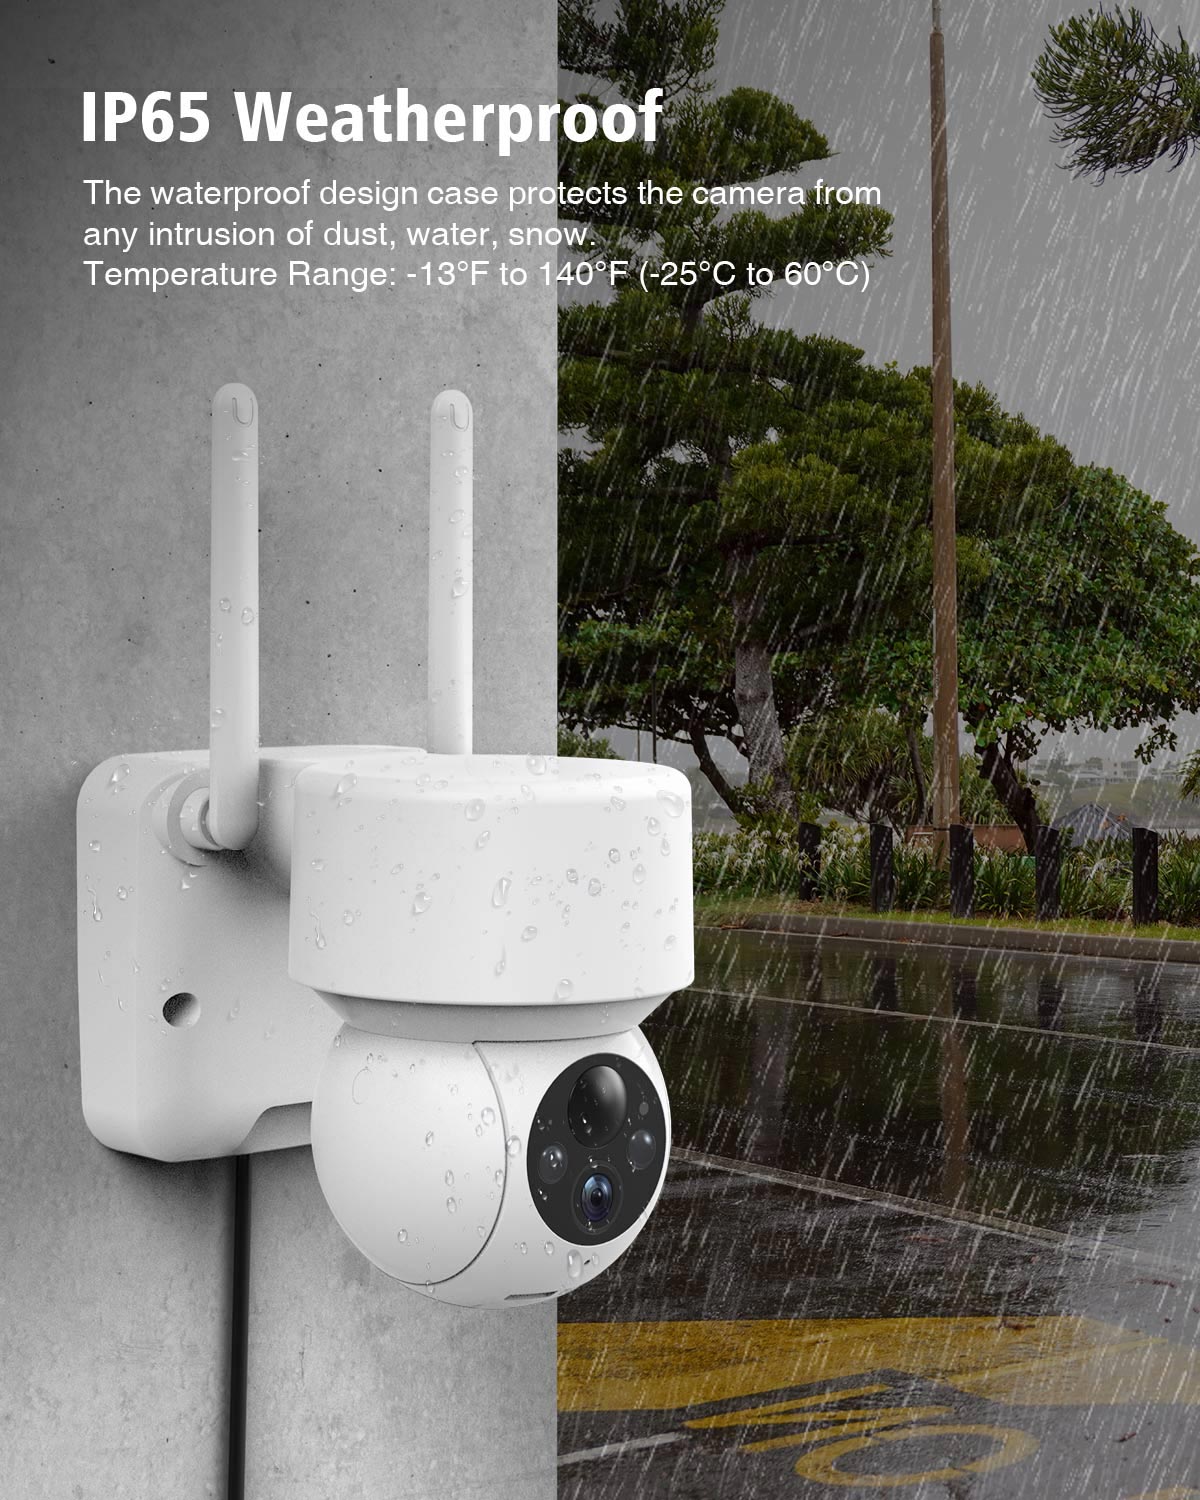 Toguard SC500 1080P Color Night Vision Wireless Security Camera (Without Solar Panel, Only Available In Europe, The UK)